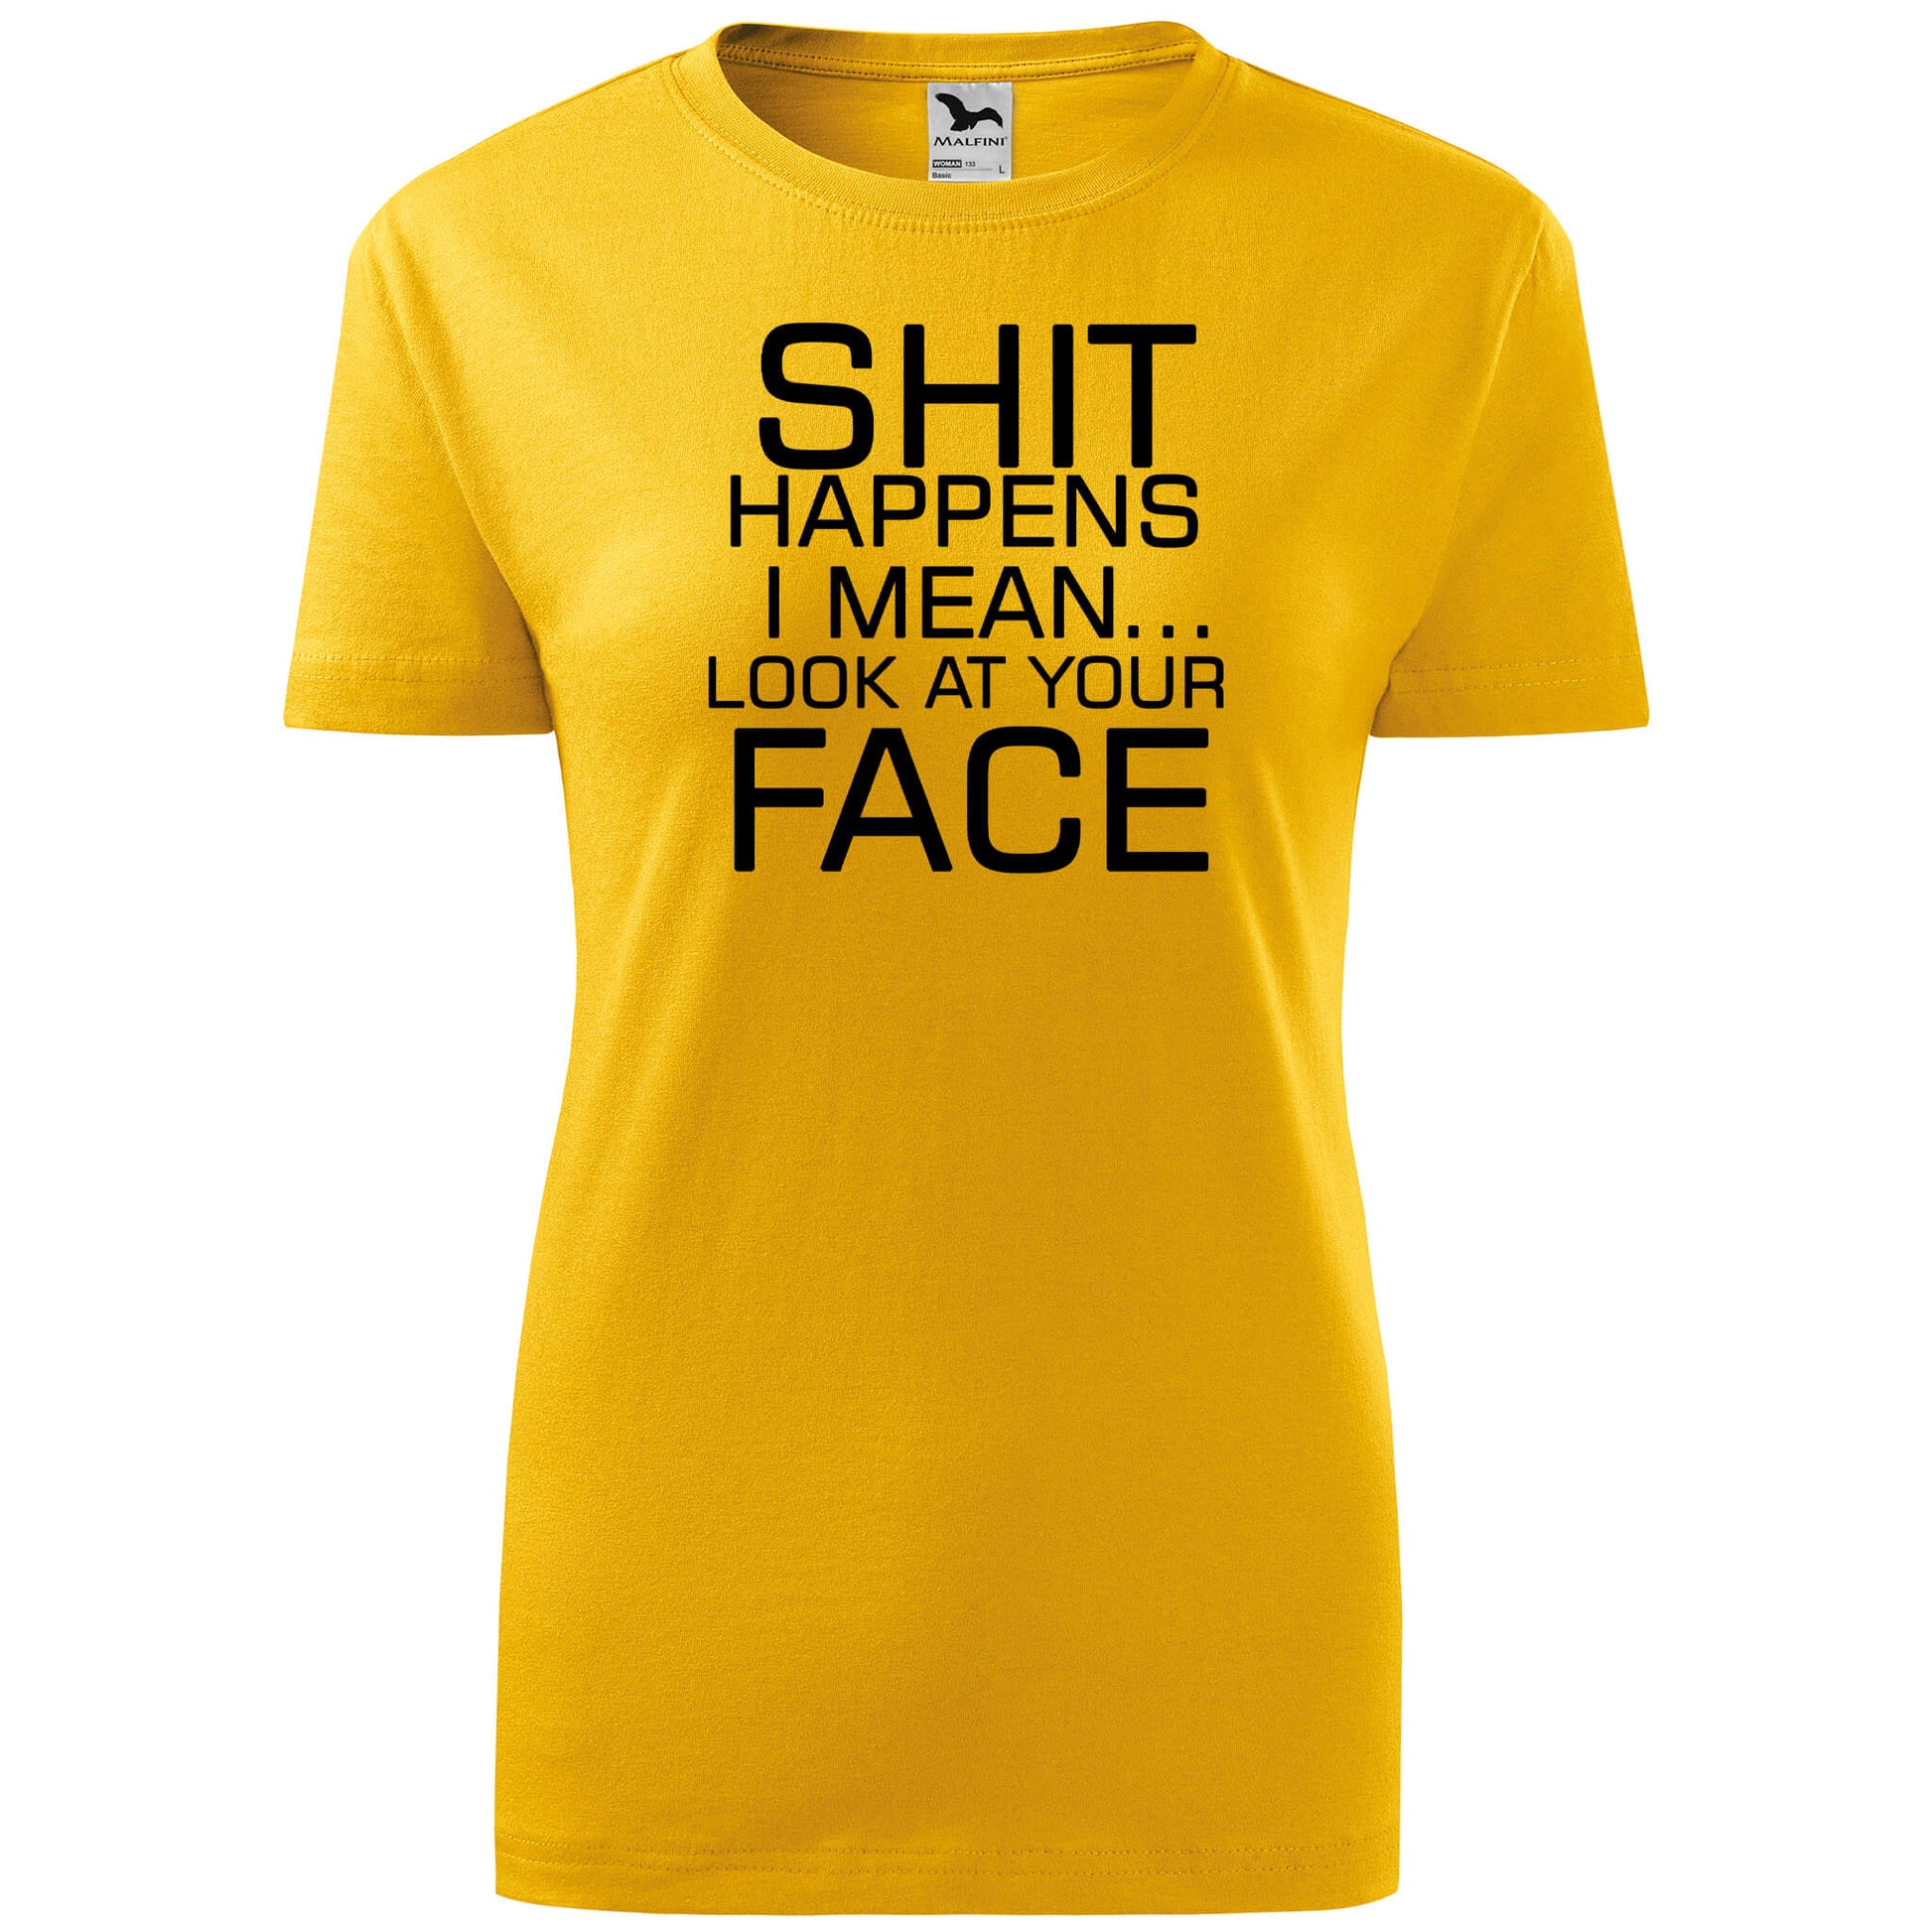 T-shirt - Shit happens, I mean look at your face - rvdesignprint